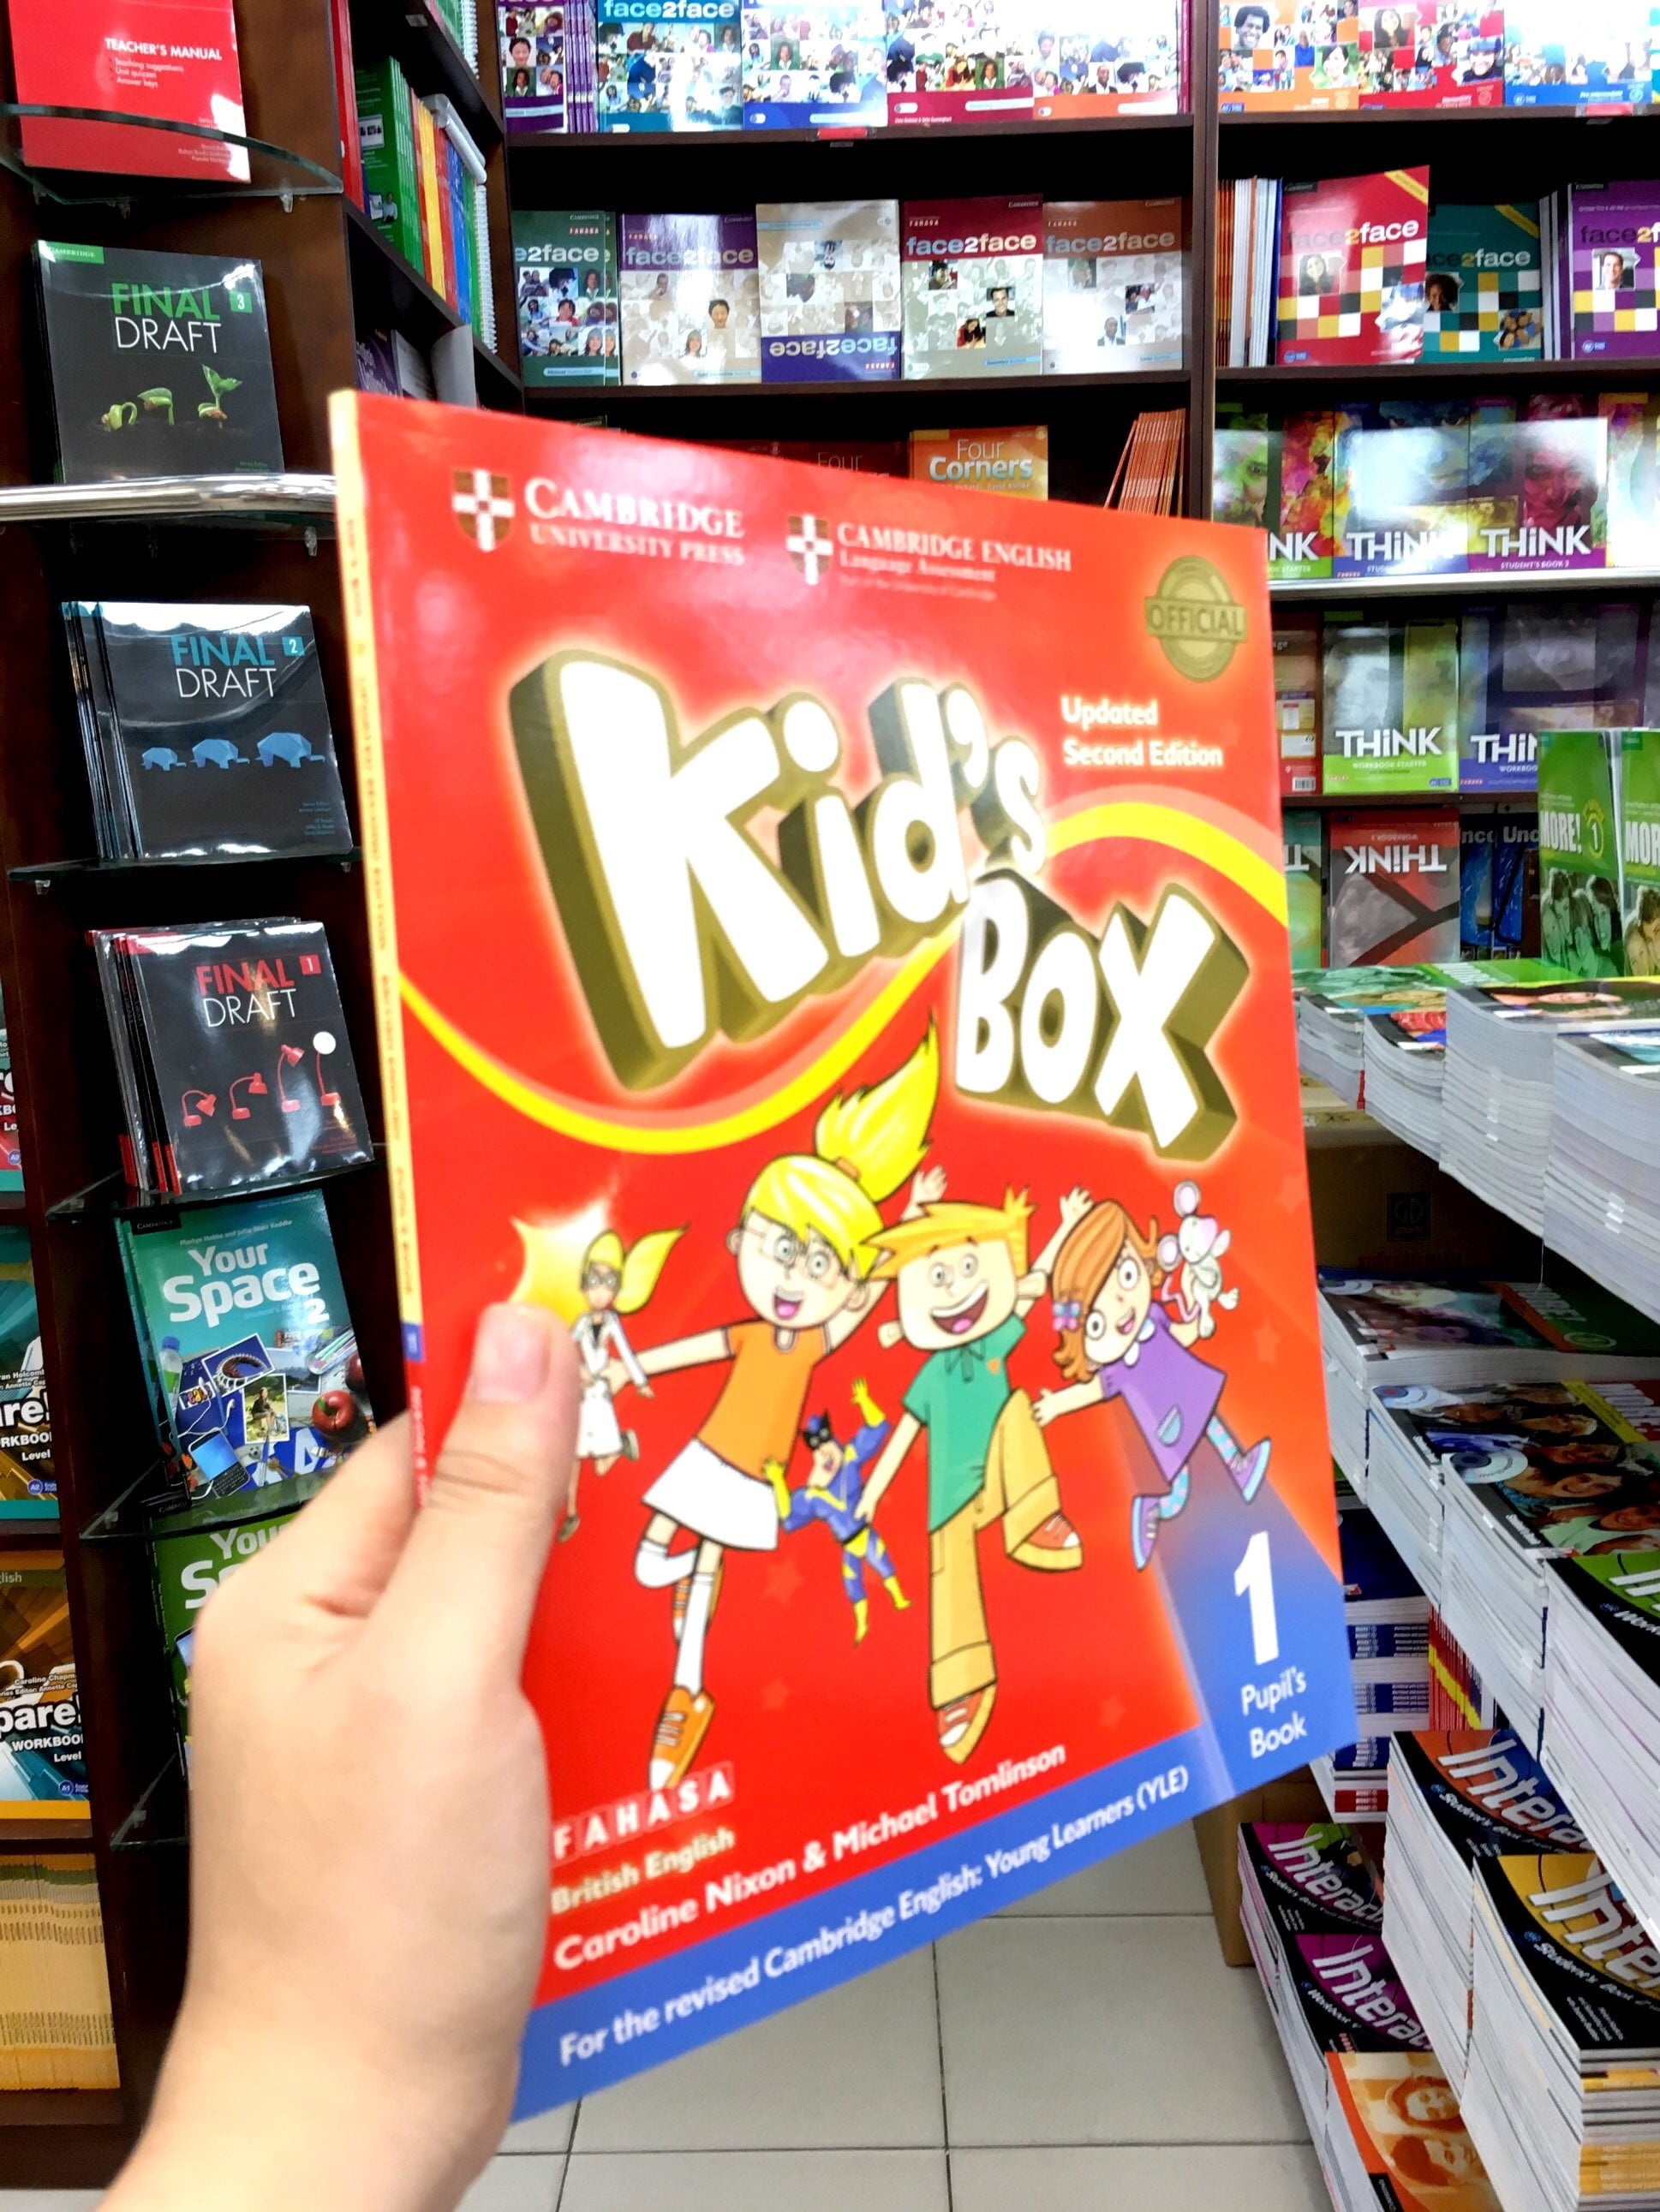 Kid's Box Second edition Pupil's Book Level 1